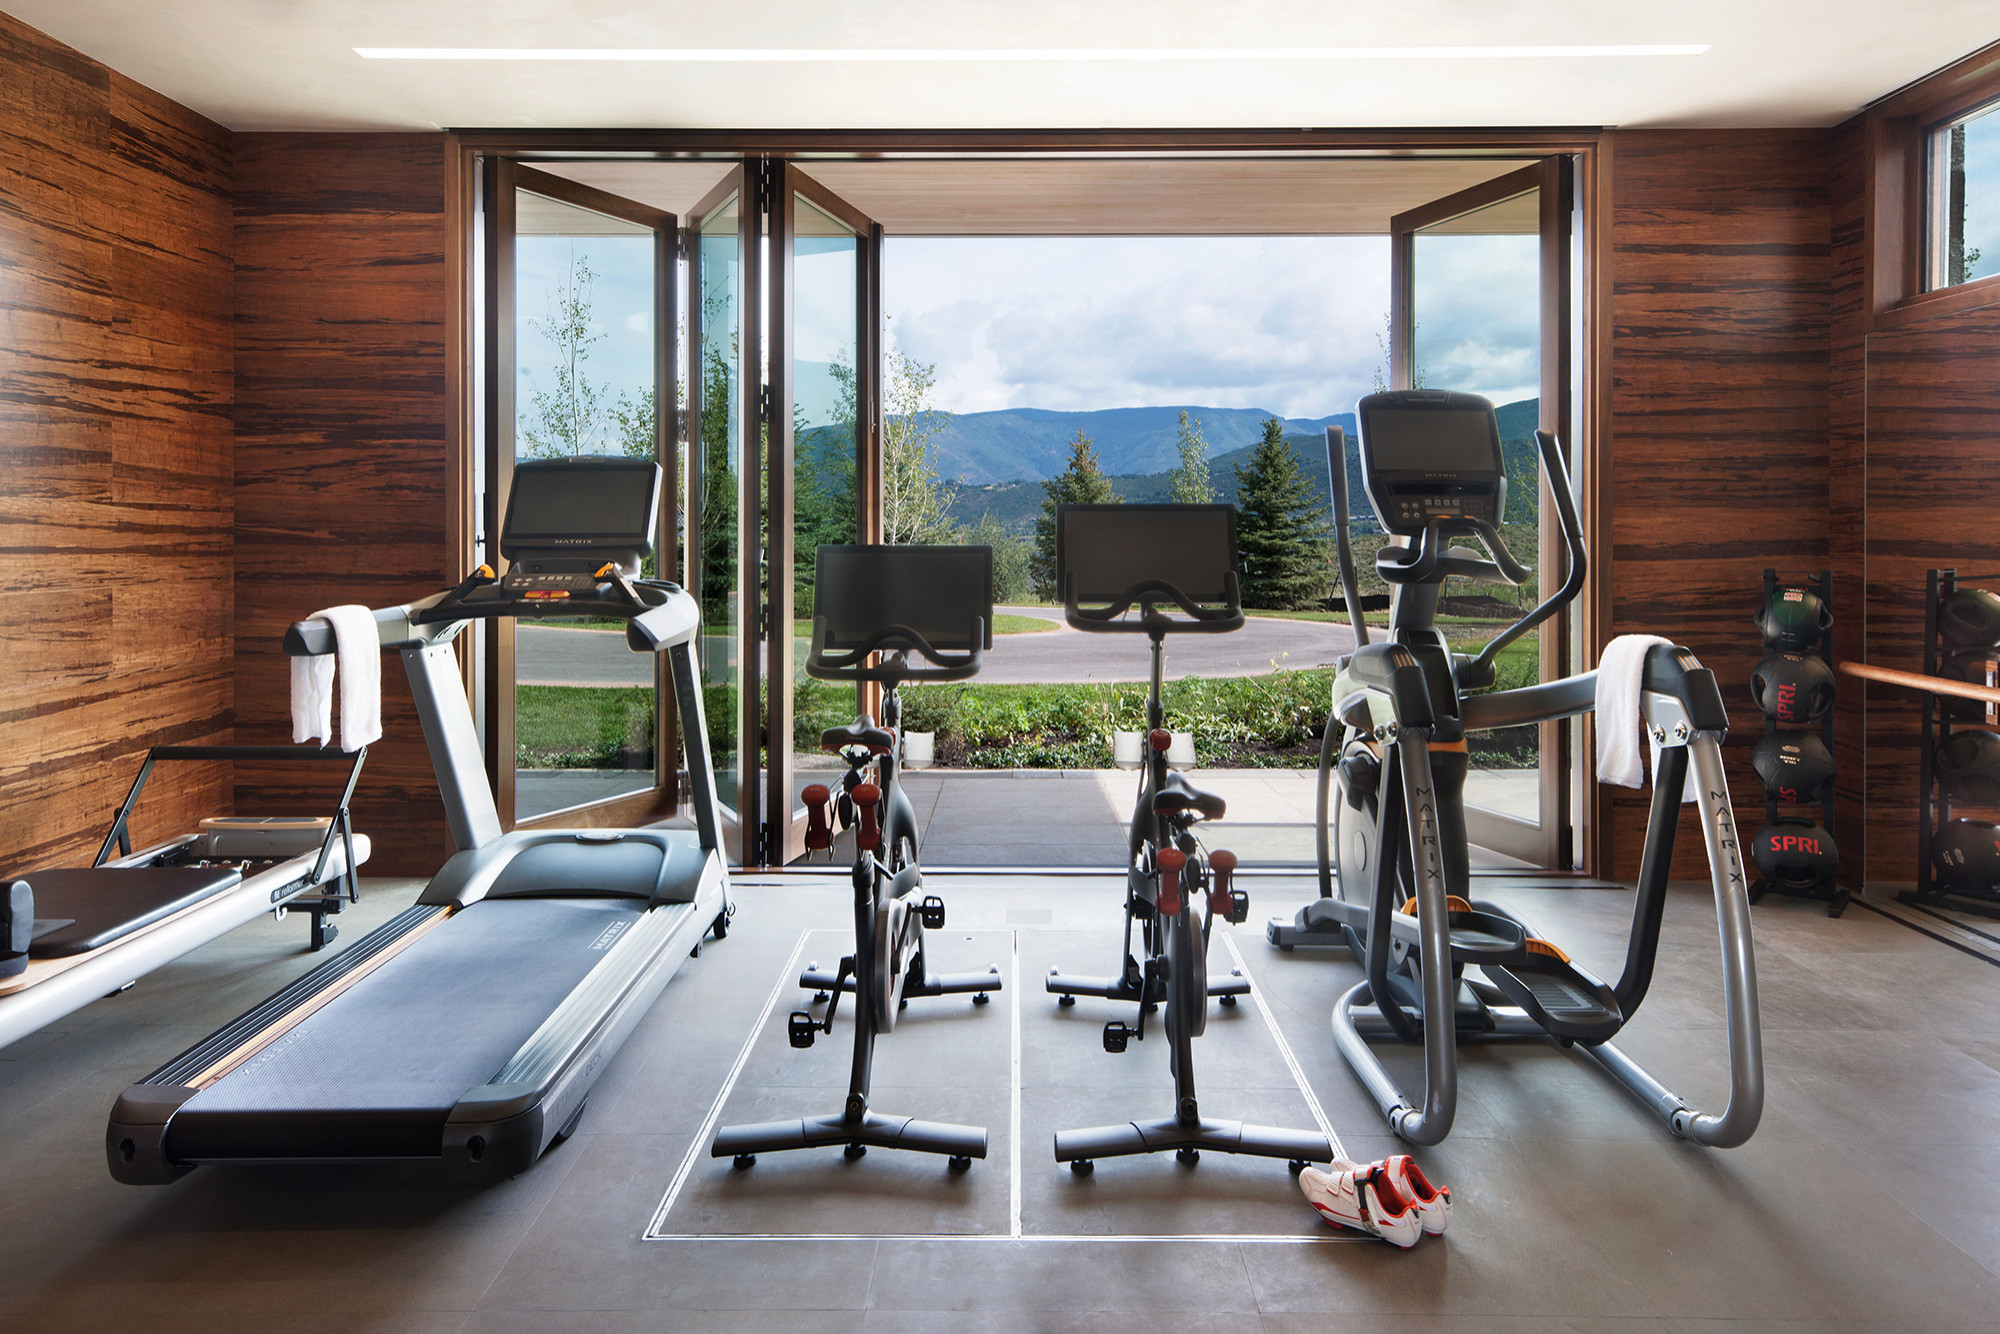 16 Awesome Rustic Home Gym Designs That Will Keep You In Shape